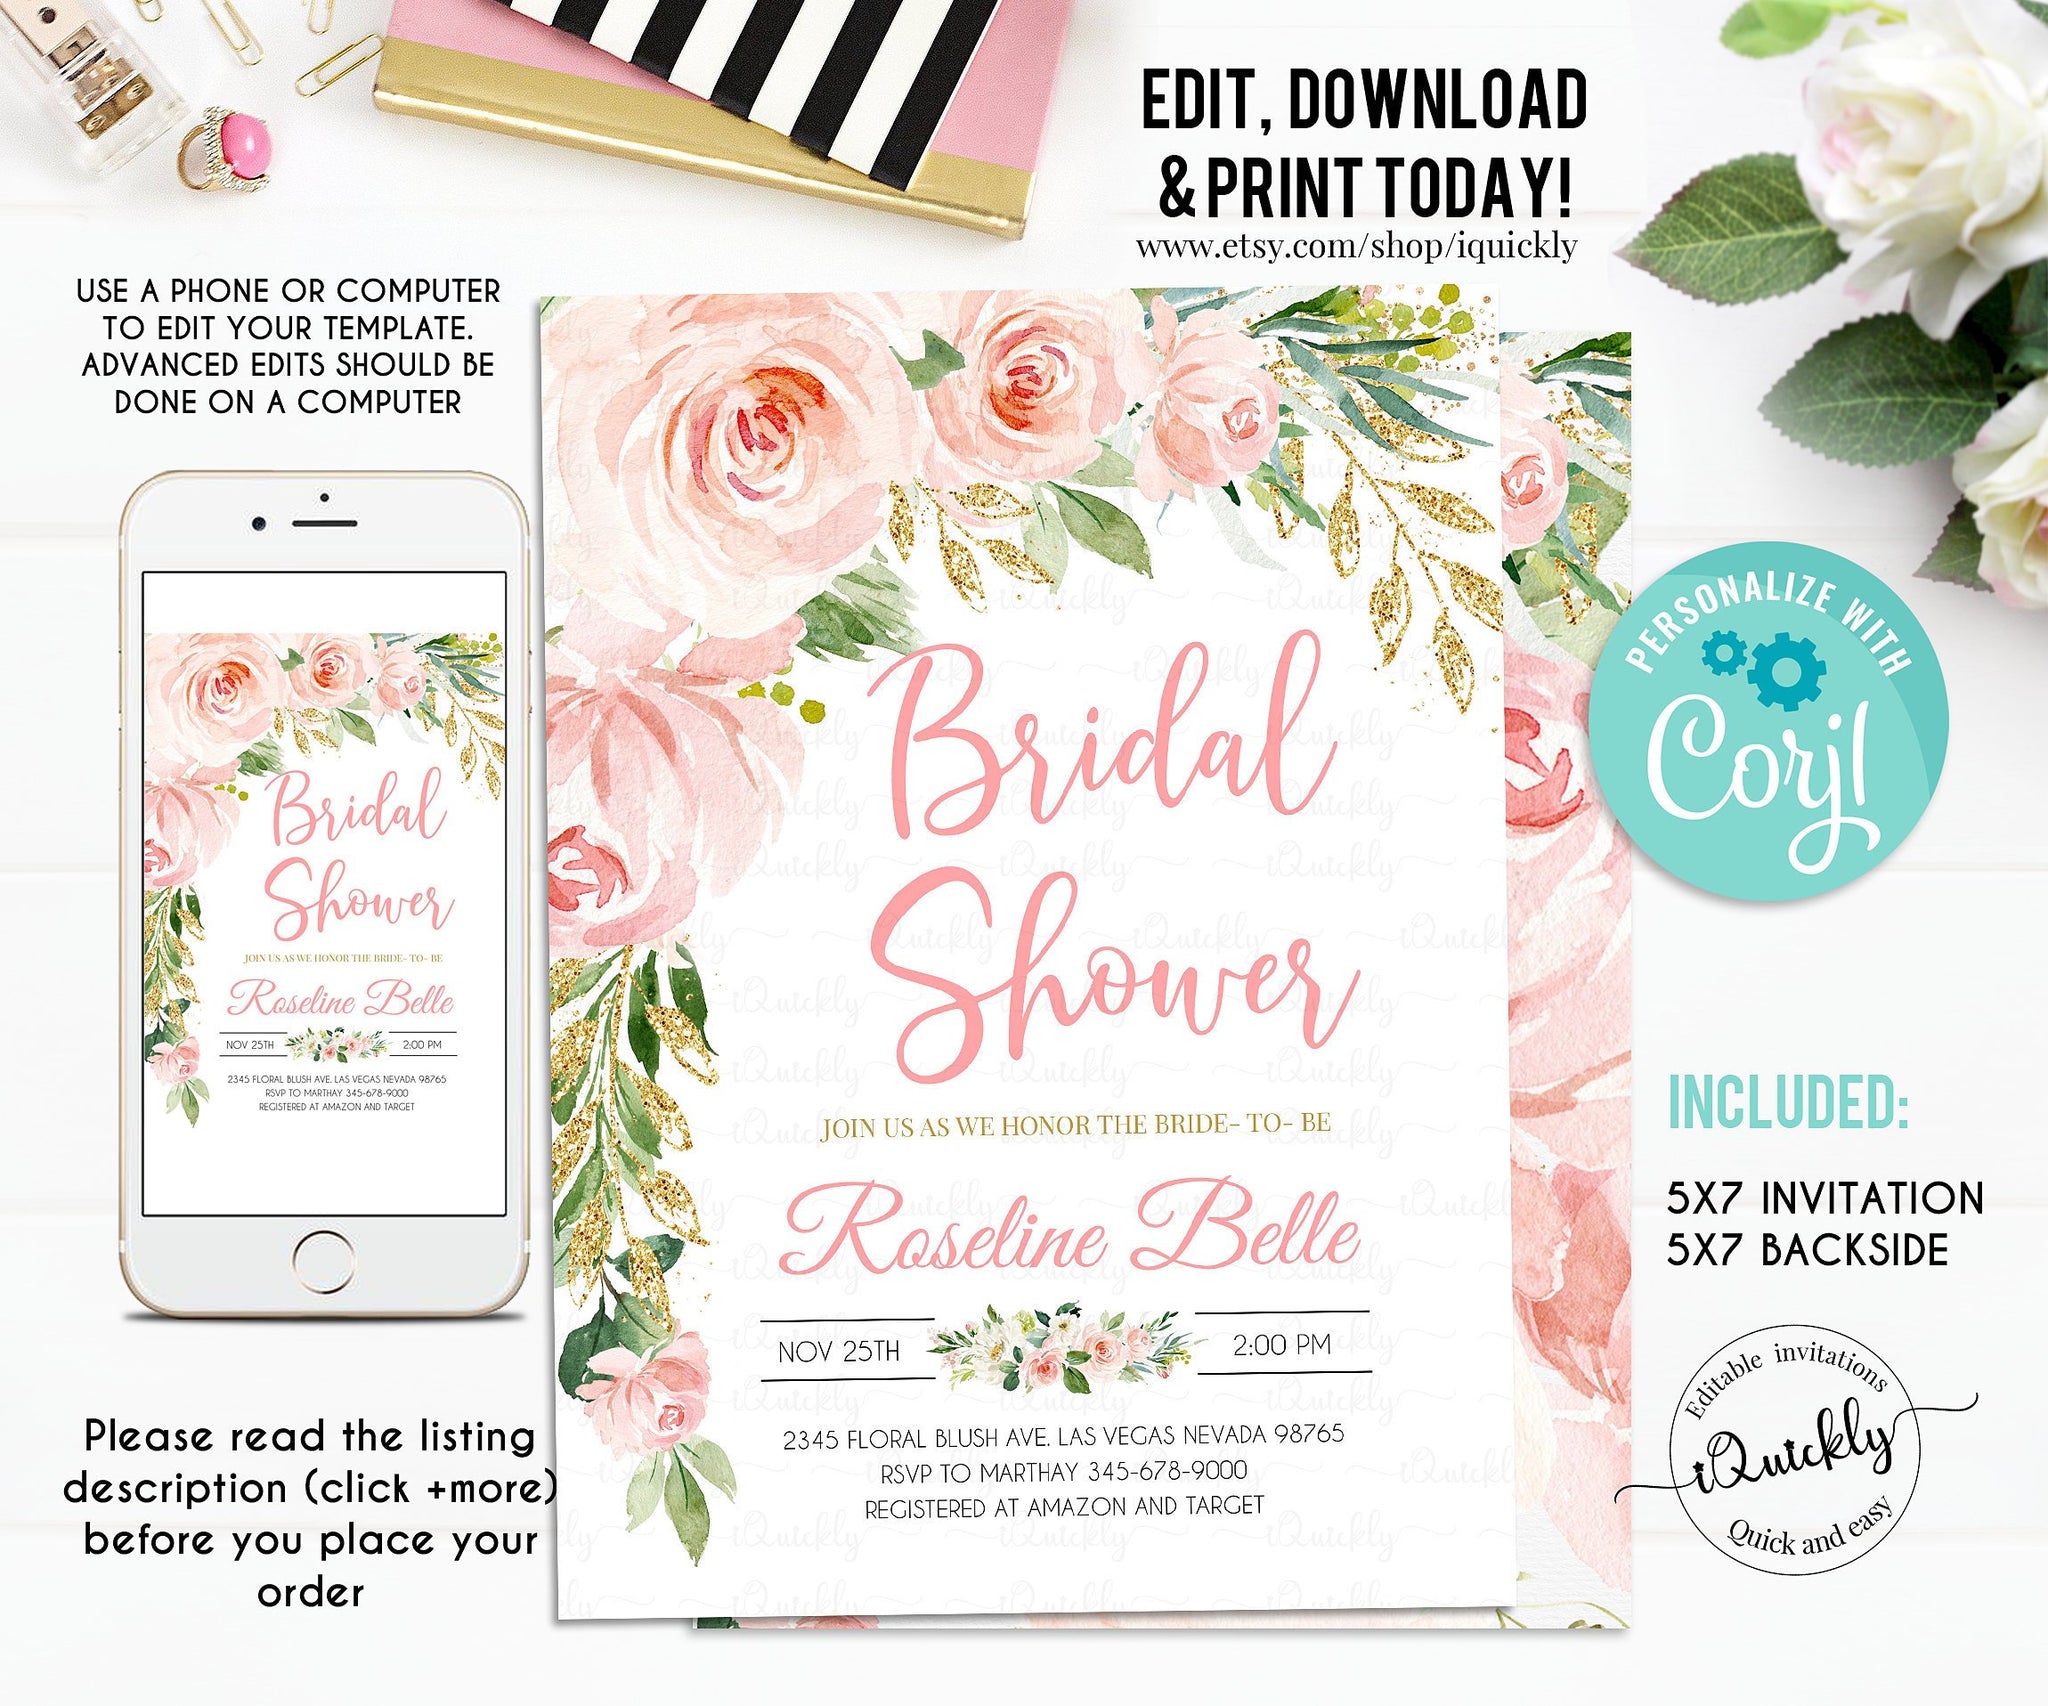 Bridal Shower Invitation,  Blush and Gold Floral Bridal Shower Invitations, EDITABLE, Flower Pink Invite Template Printable Instant download